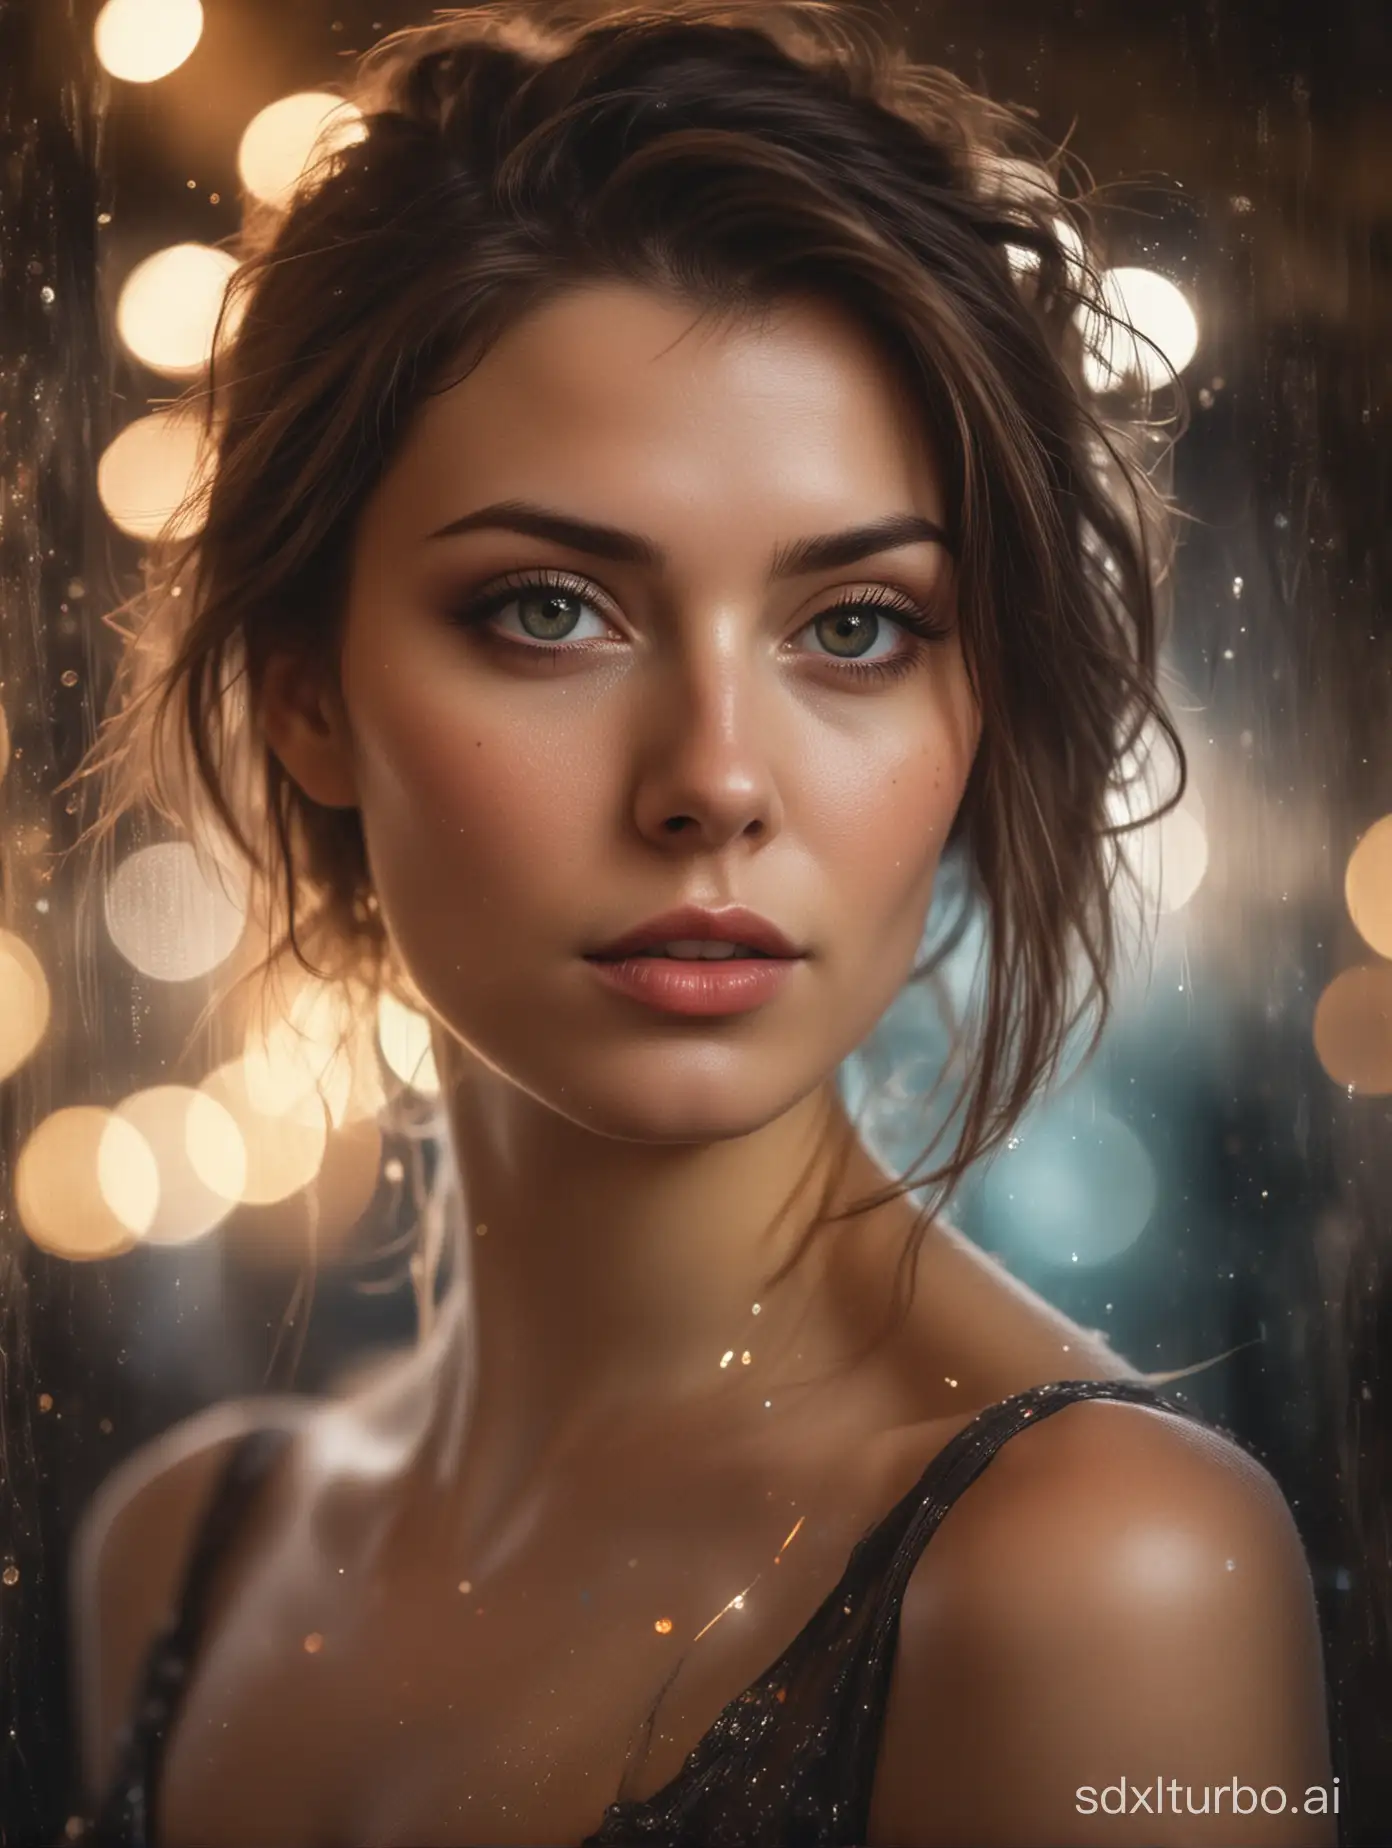 Mysterious-Woman-in-Bokeh-Overlay-Seductive-Gaze-and-Blurred-Background